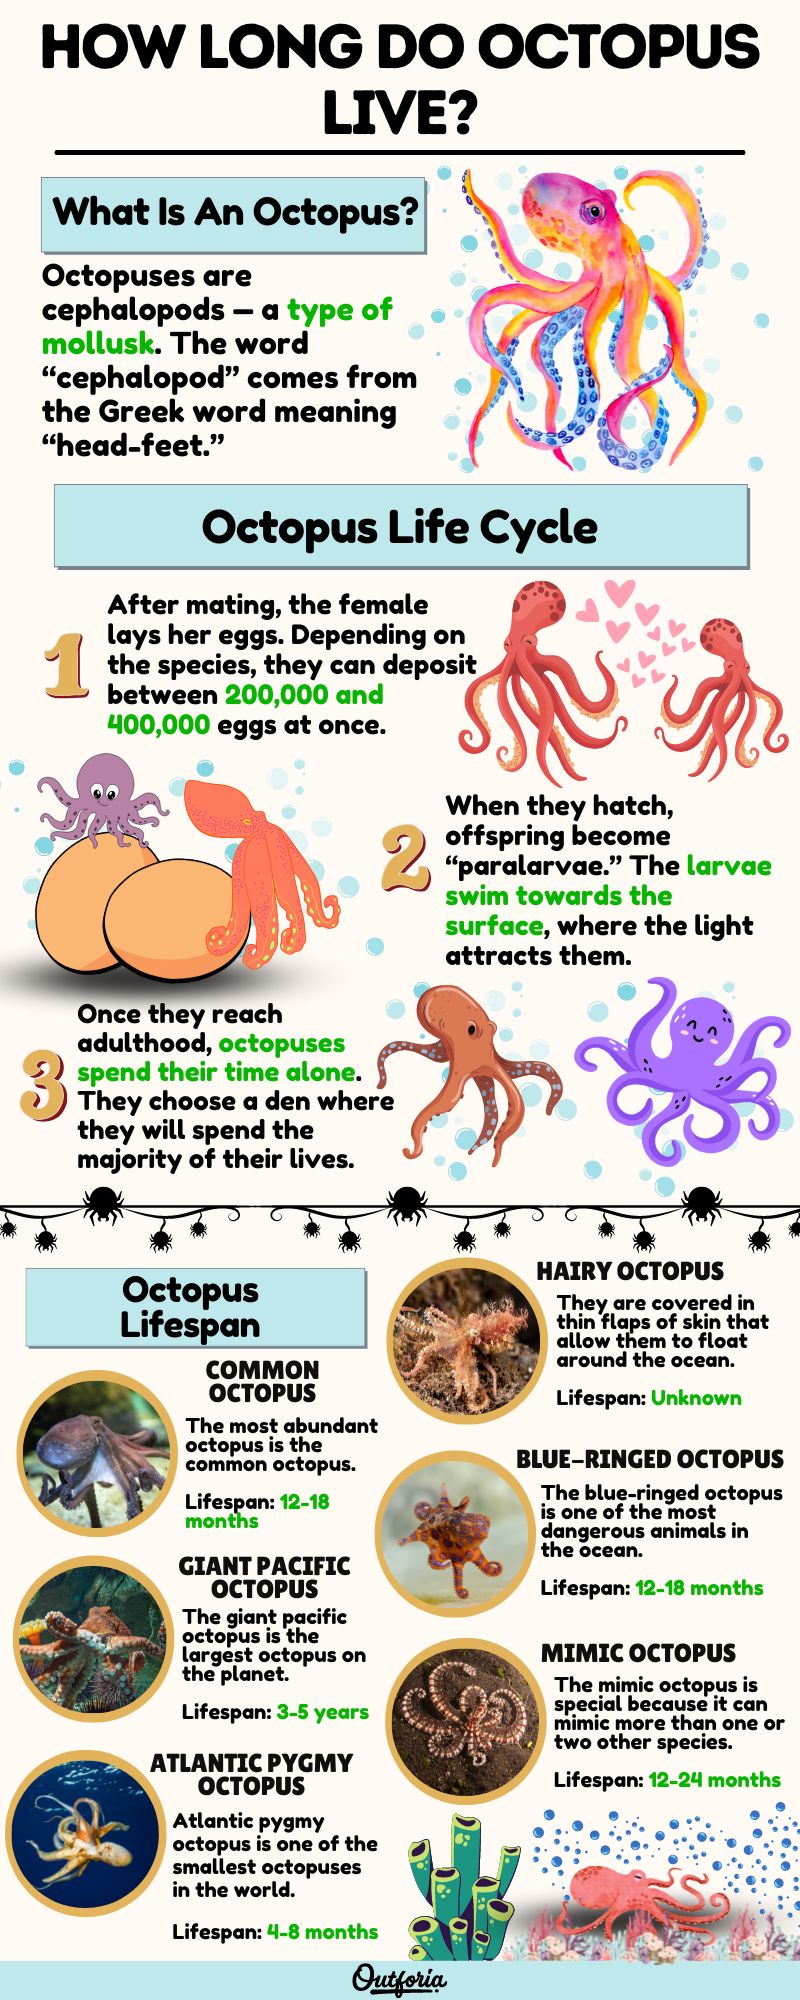 How Long Do Octopus Live? All About Their Unusual Life Cycle - Outforia